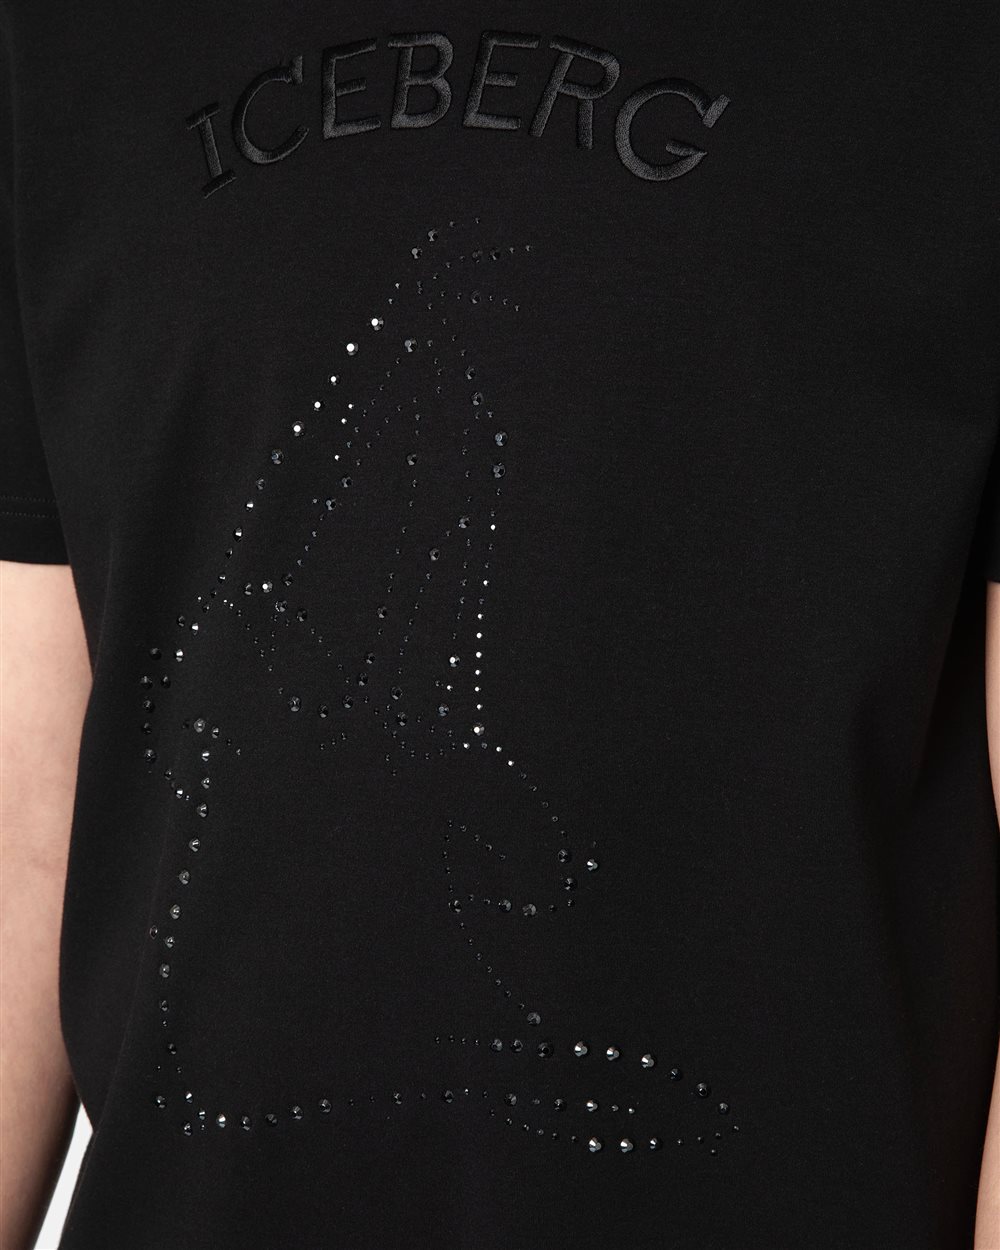 Black t-shirt with logo and studs - Iceberg - Official Website